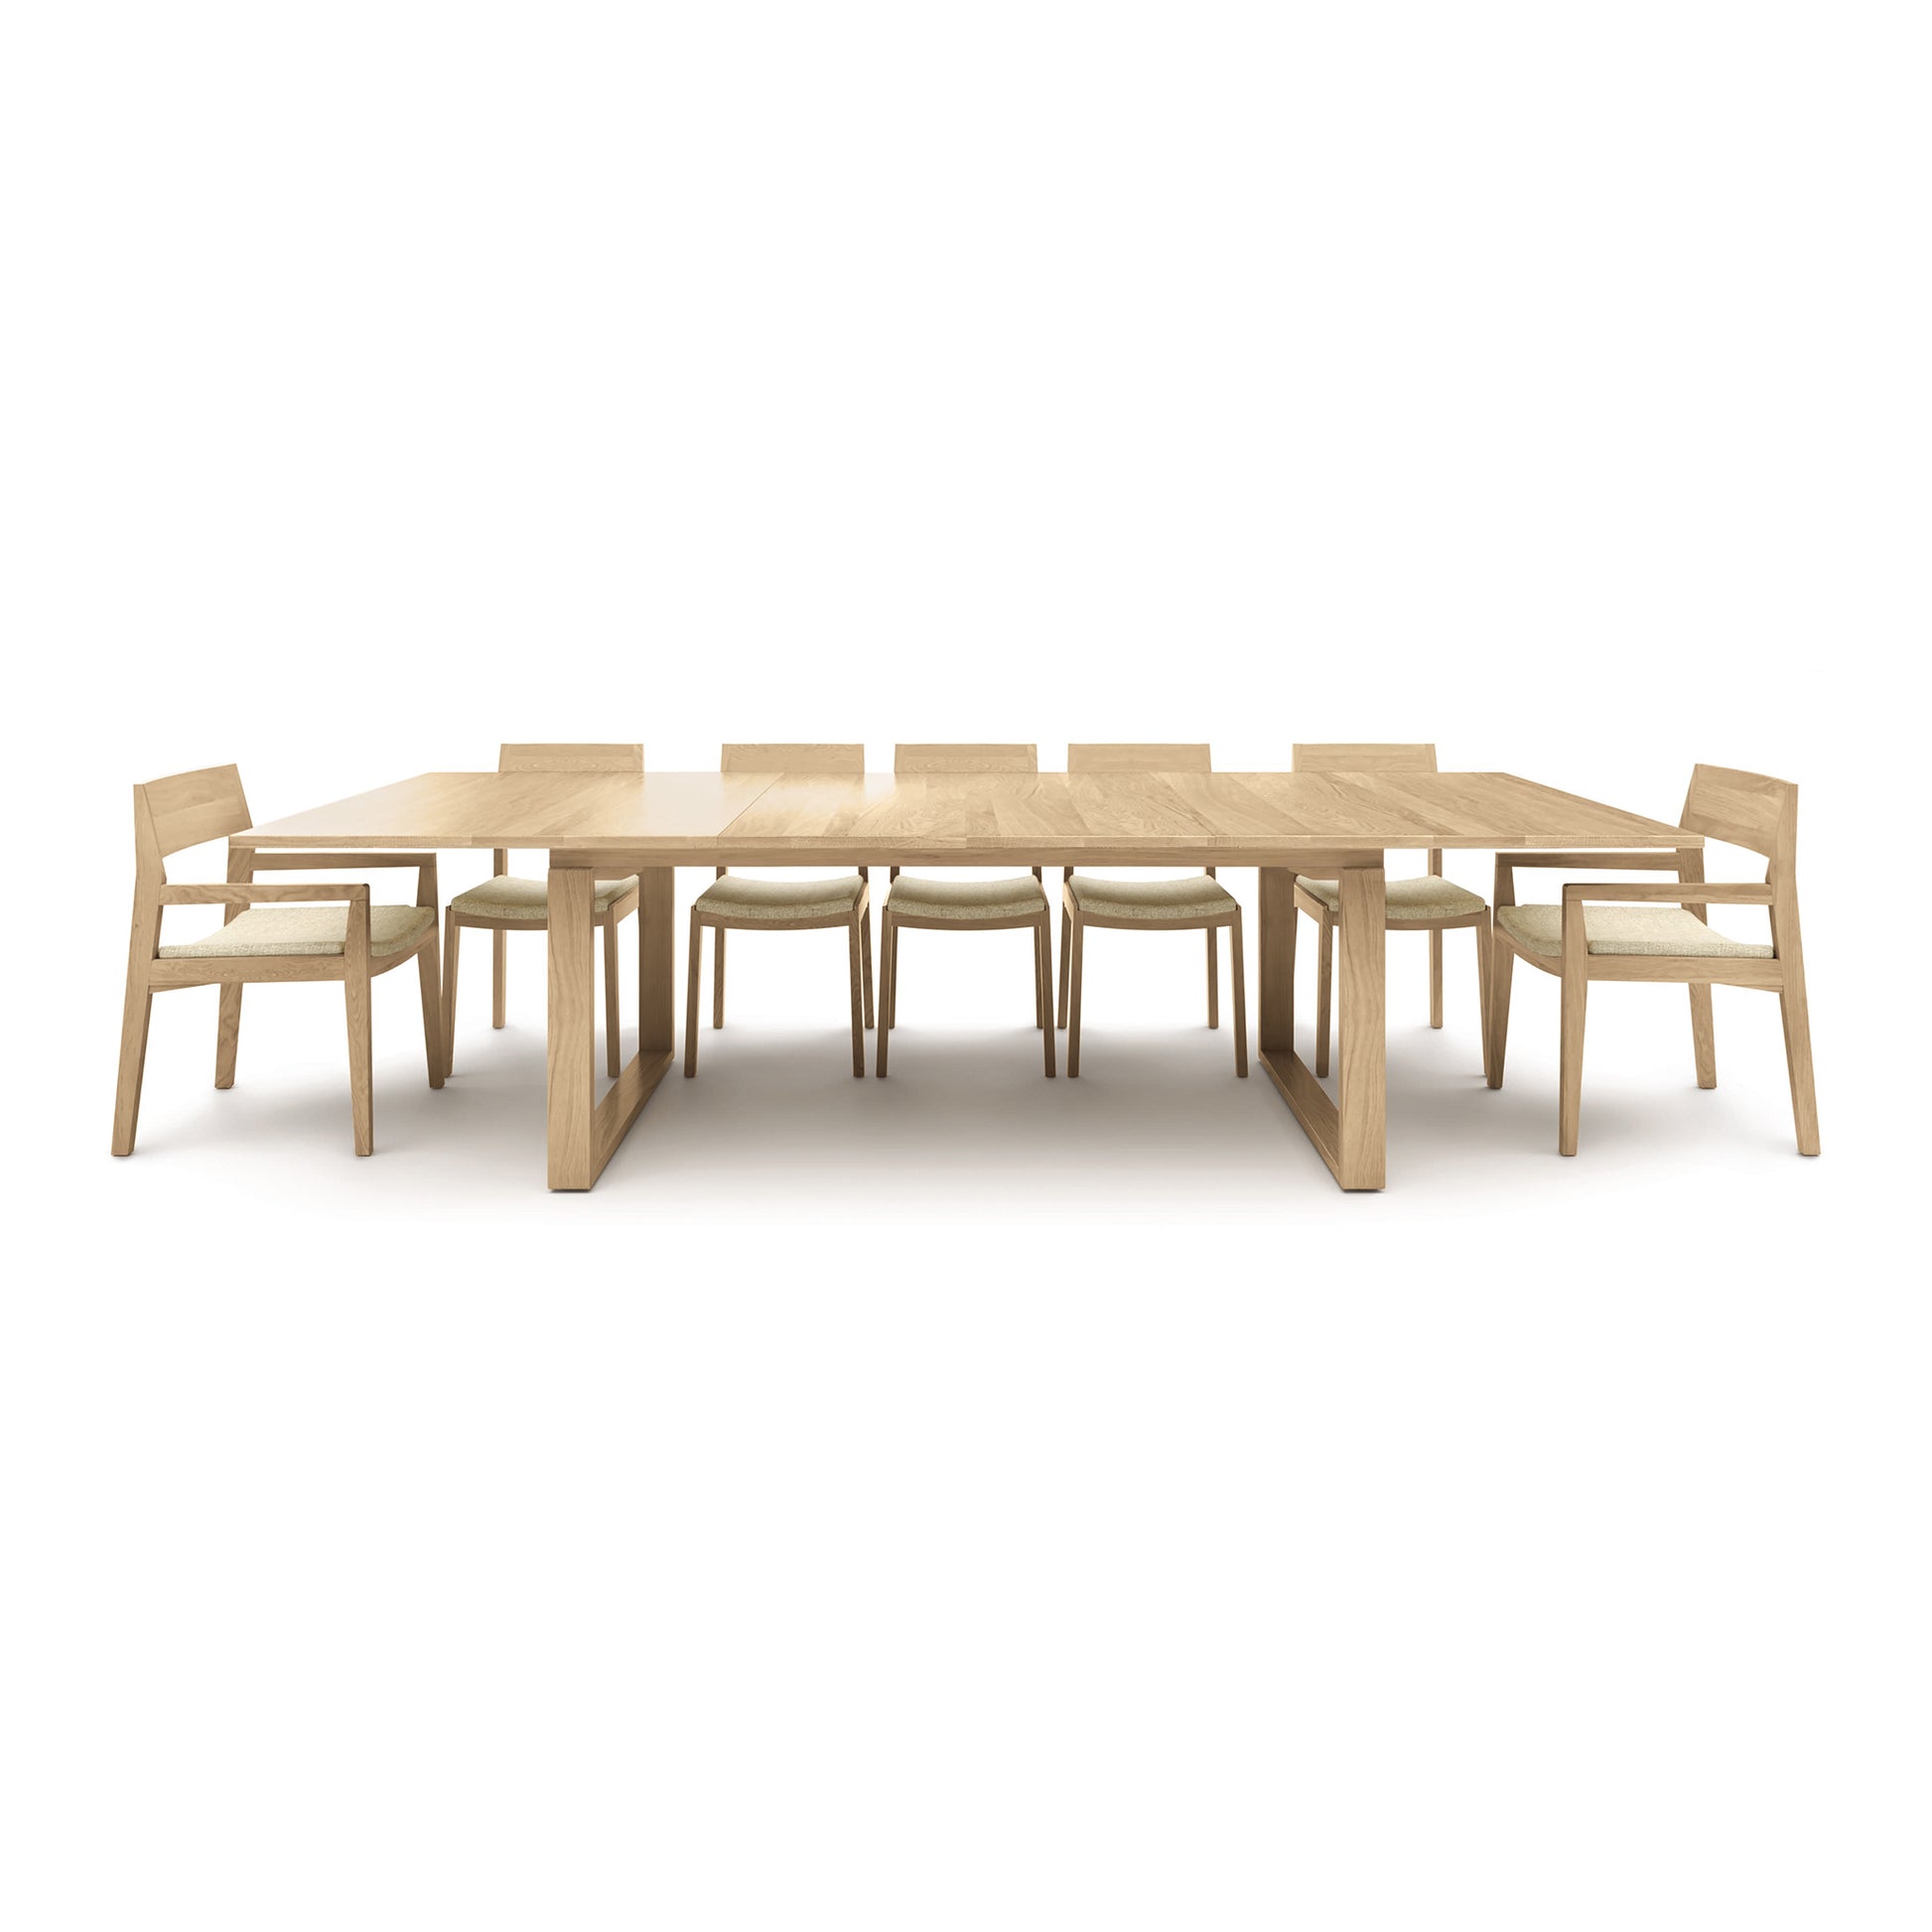 A Copeland Furniture Iso Extension Dining Table made from solid oak wood with six chairs on a white background.